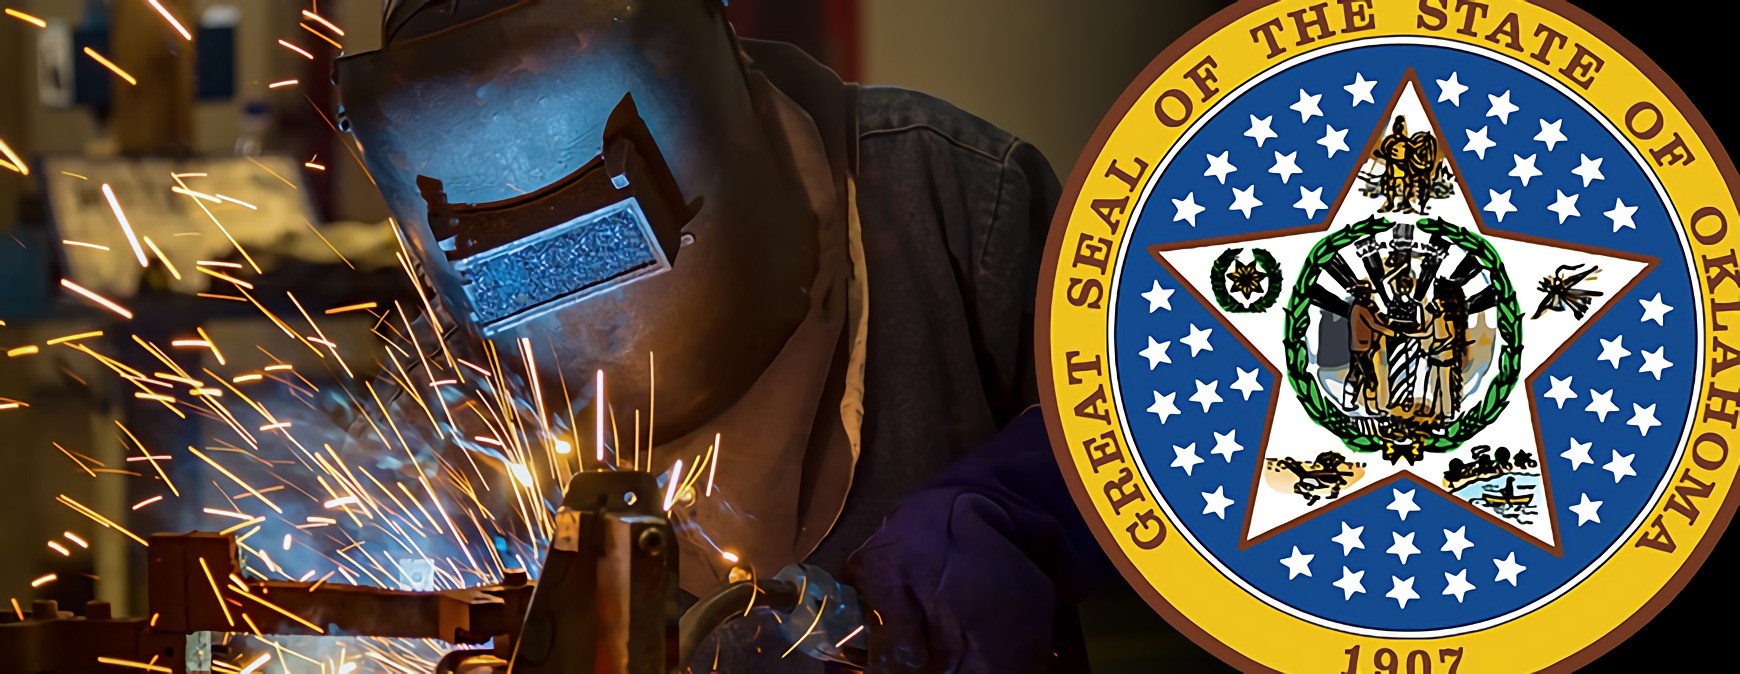 oklahoma state seal and skilled worker